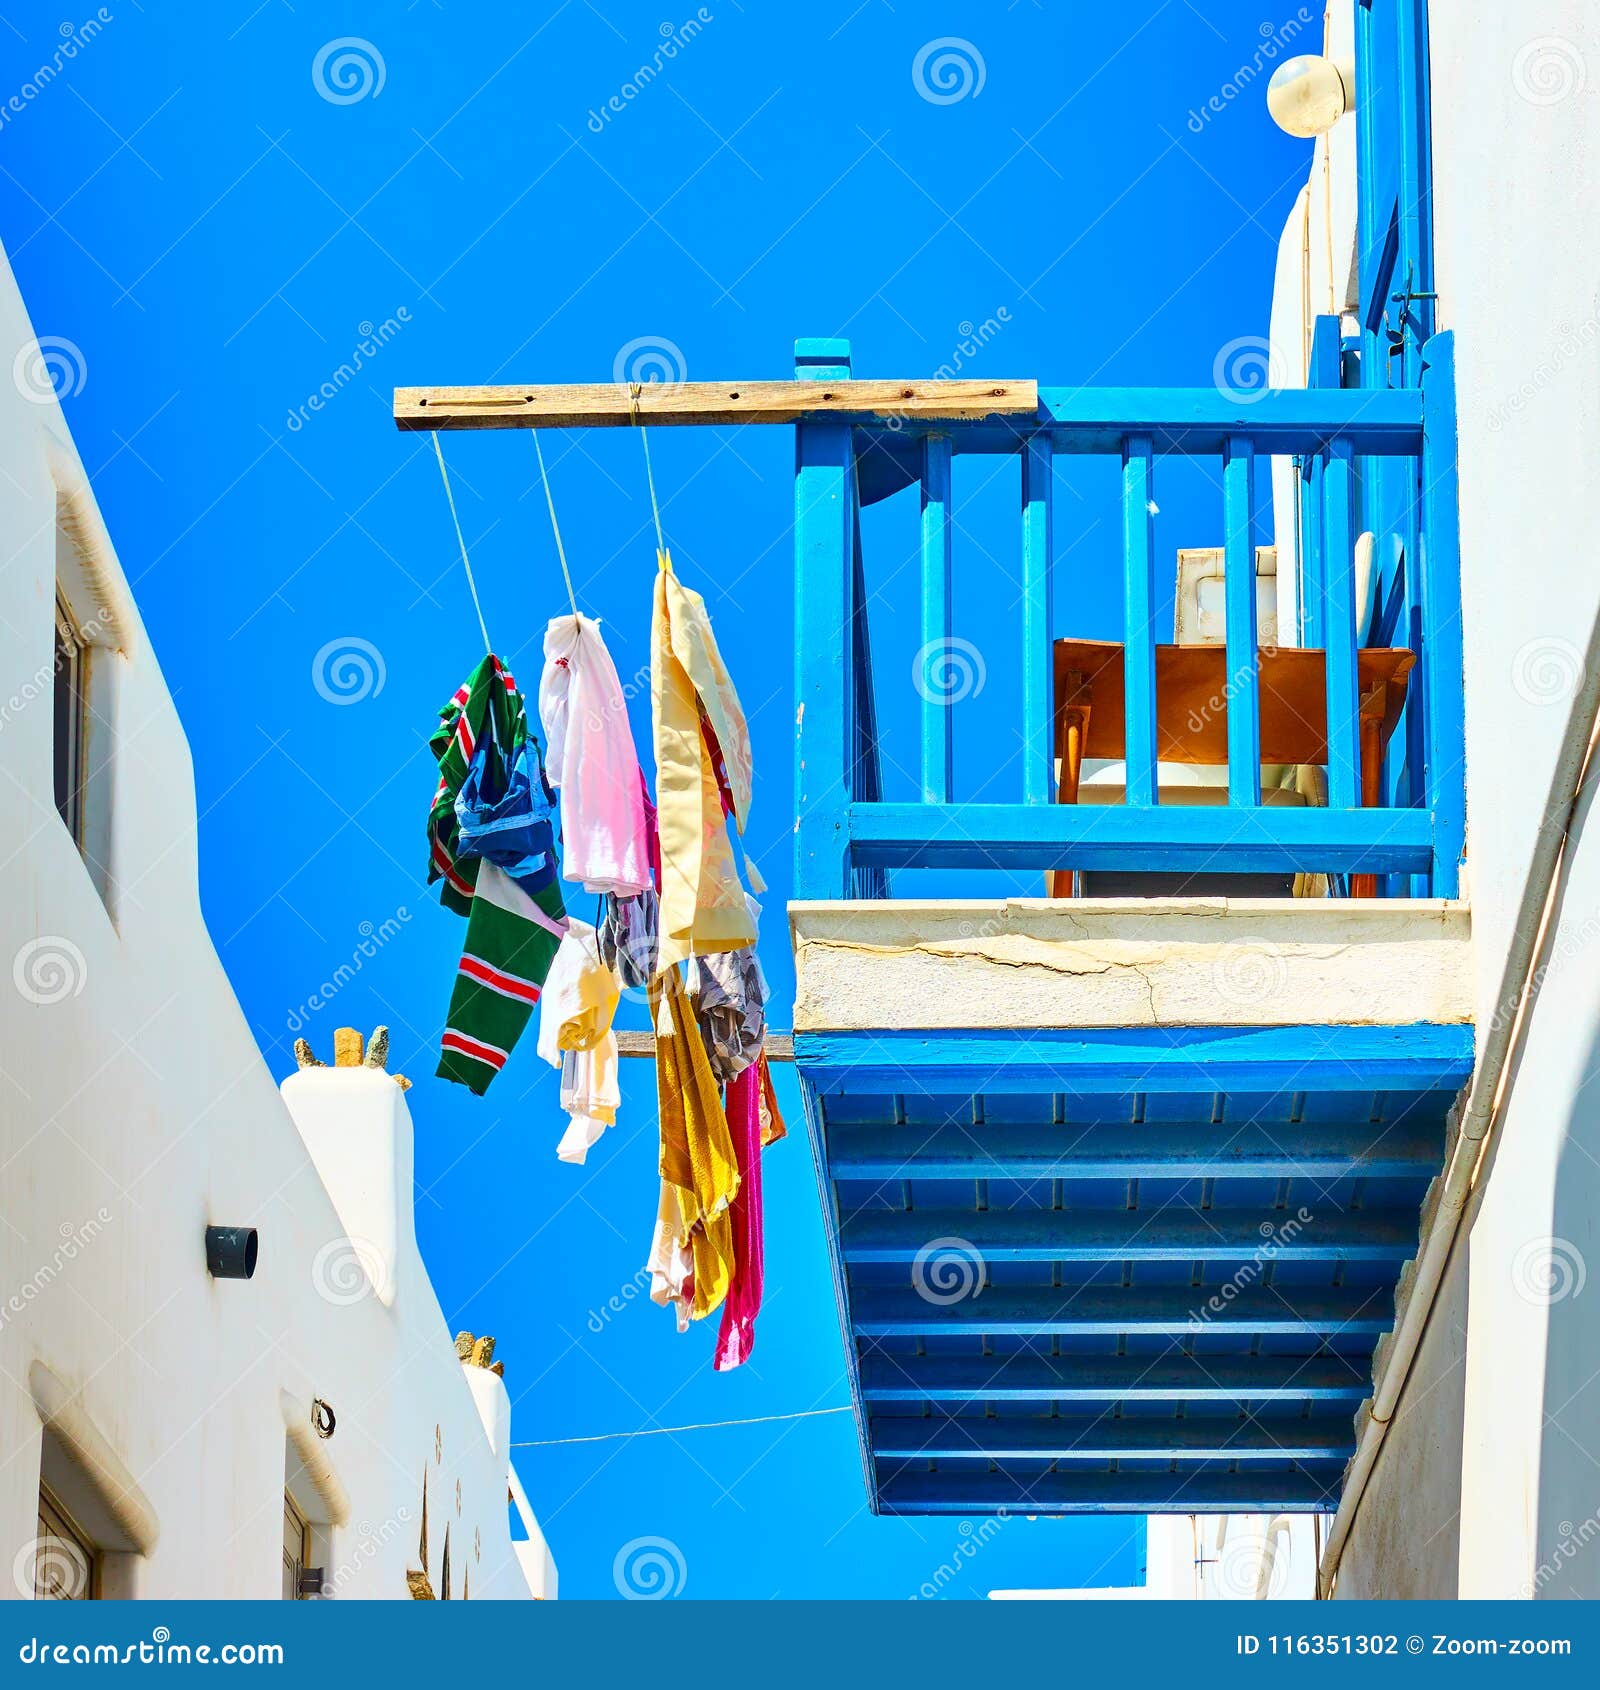 airing clothes on a balcony